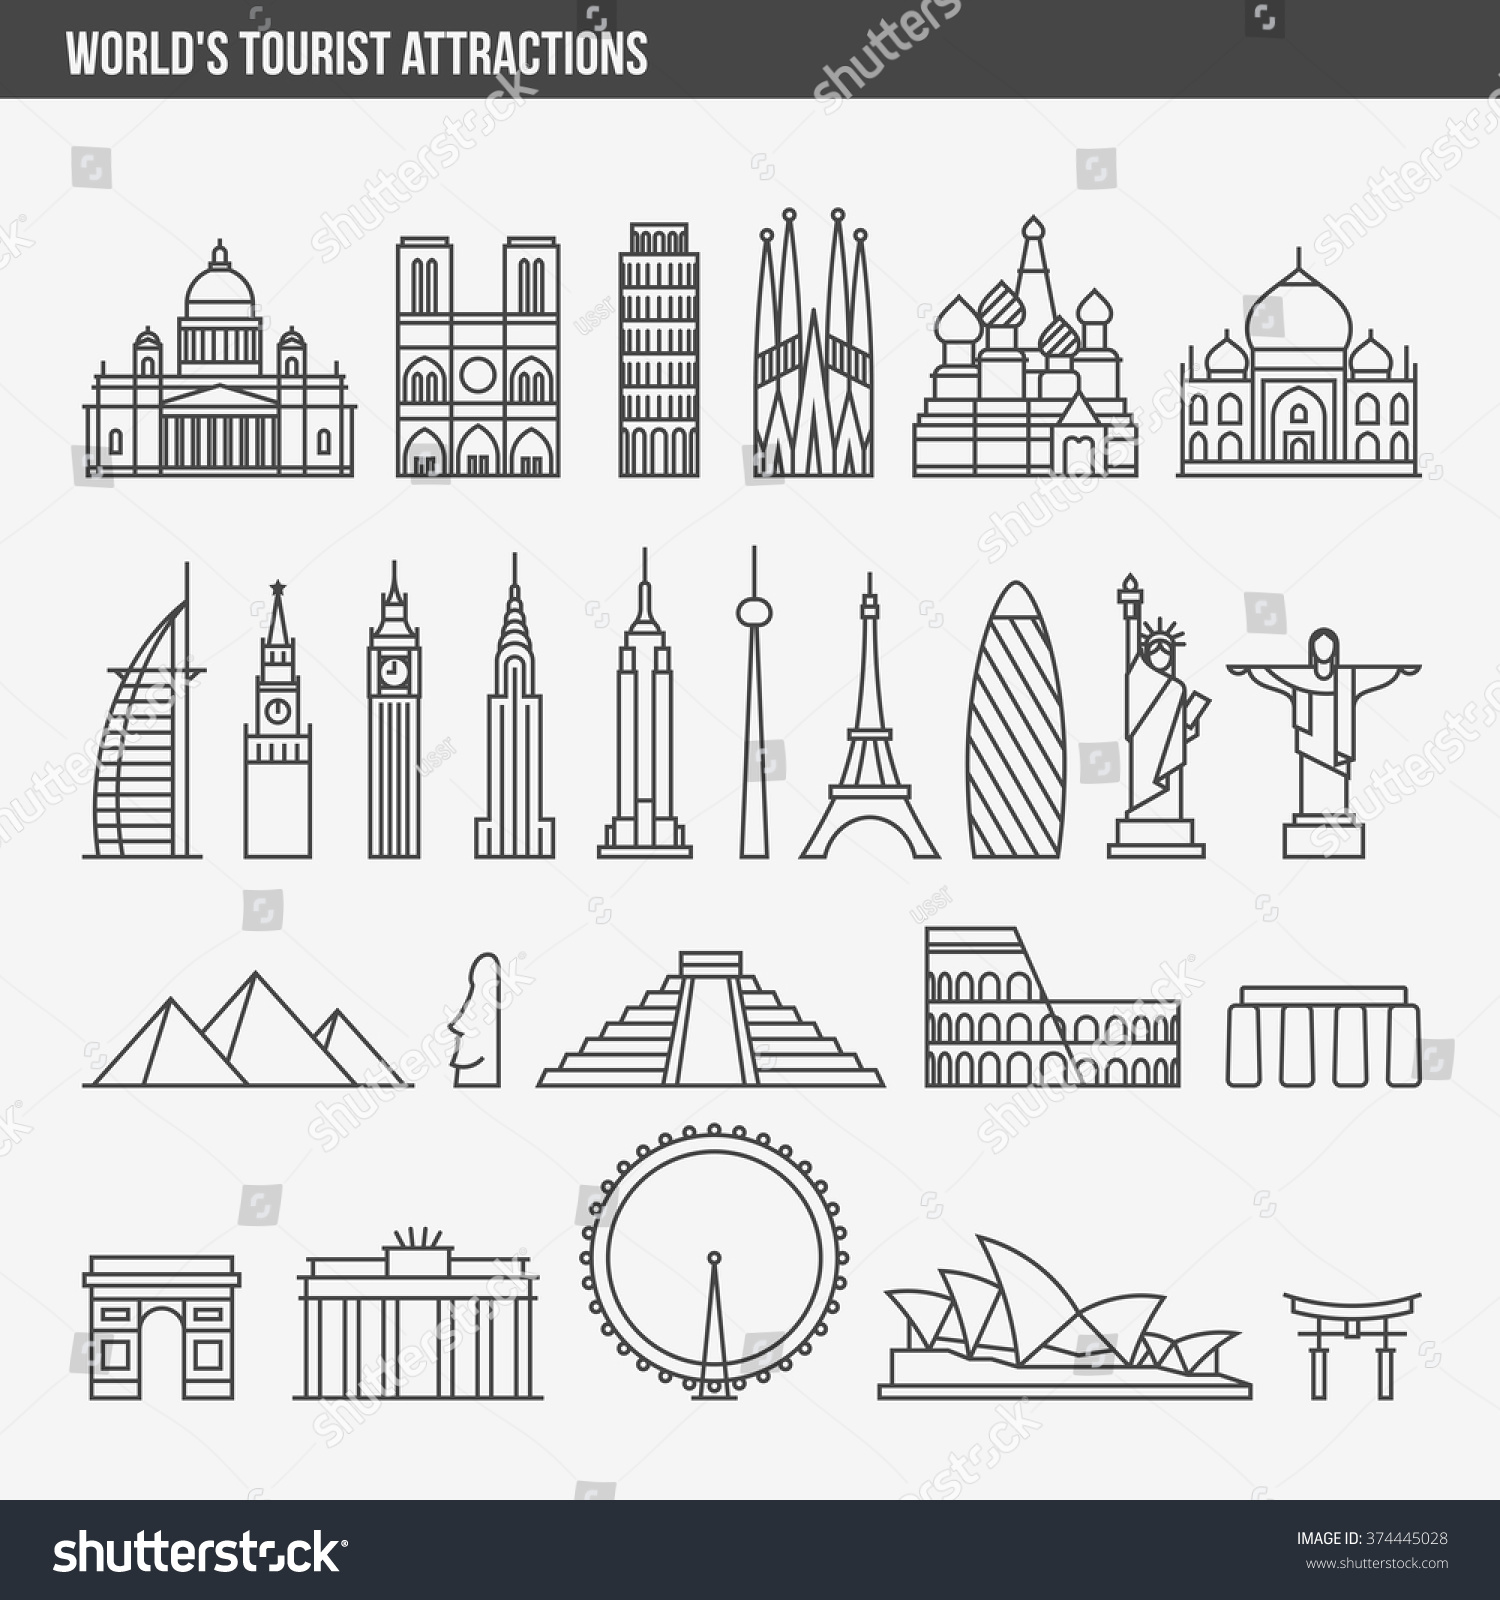 SVG of Flat line design style vector illustration icons set and logos of top tourist attractions, historical buildings, towers, monuments, statues, sculptures and modern architecture svg